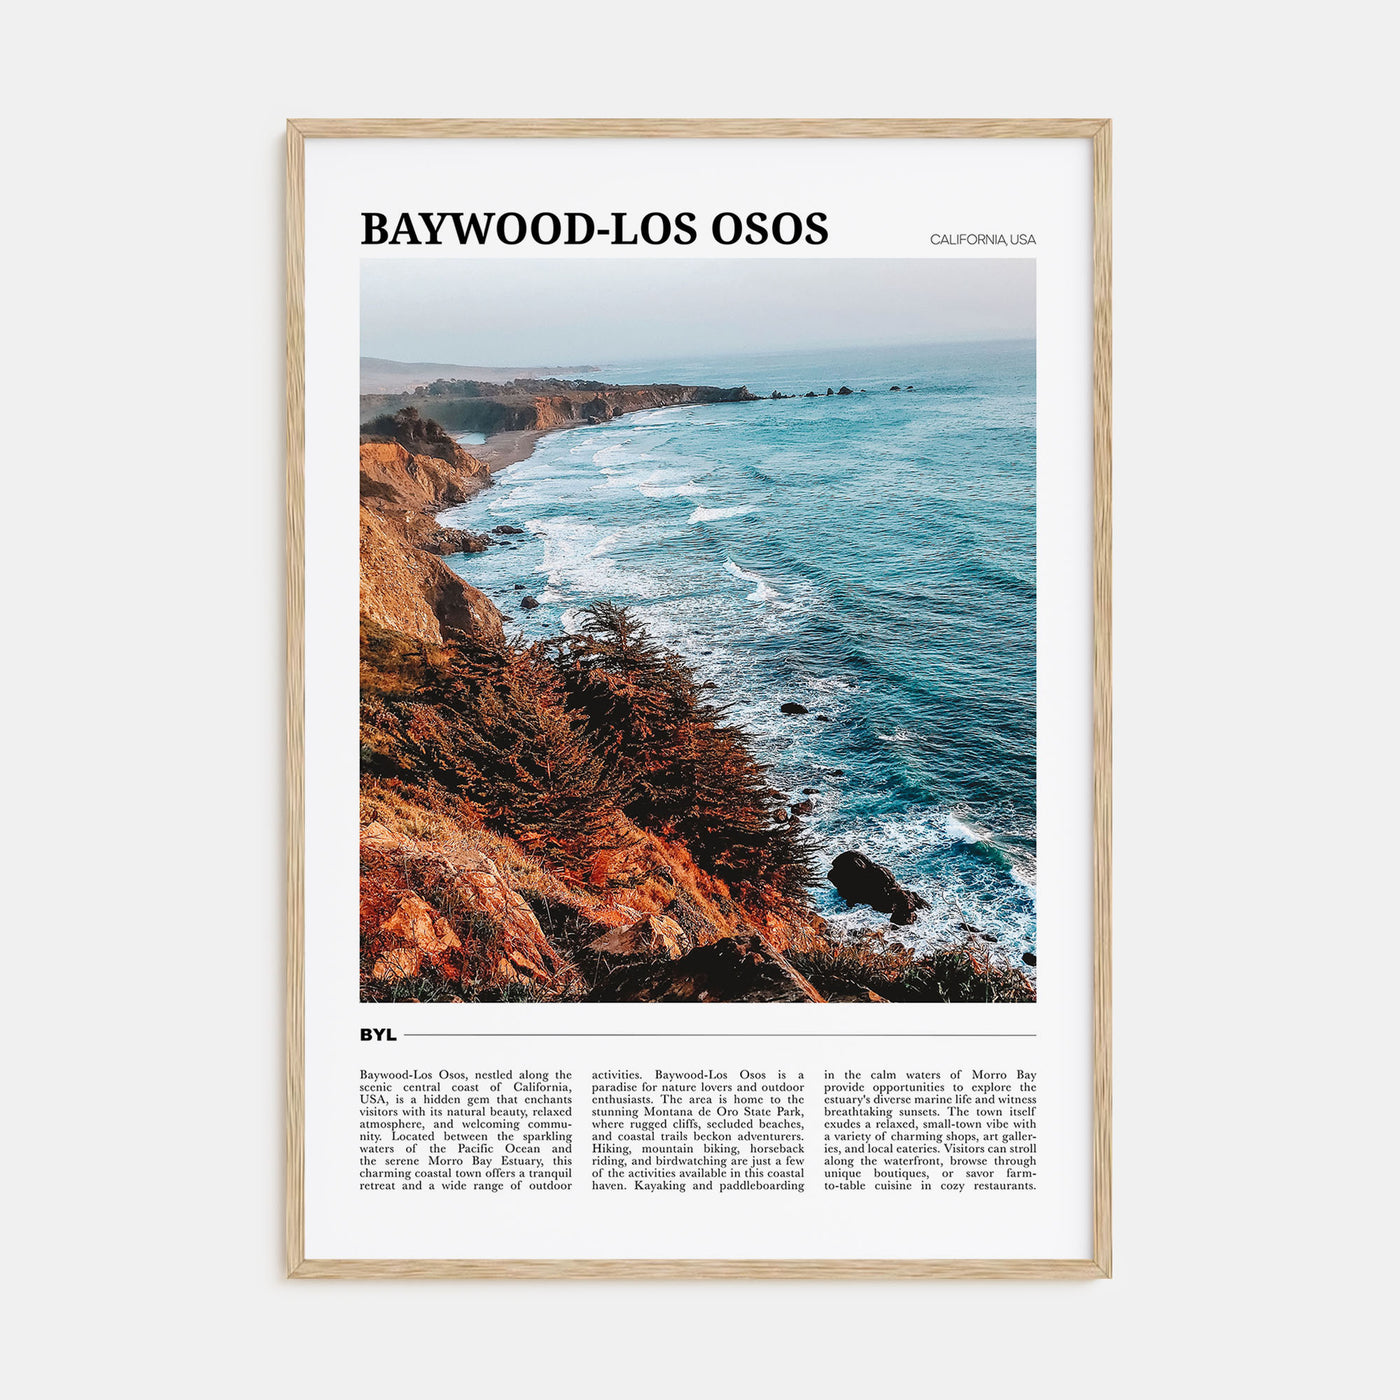 Baywood-Los Osos Travel Color Poster